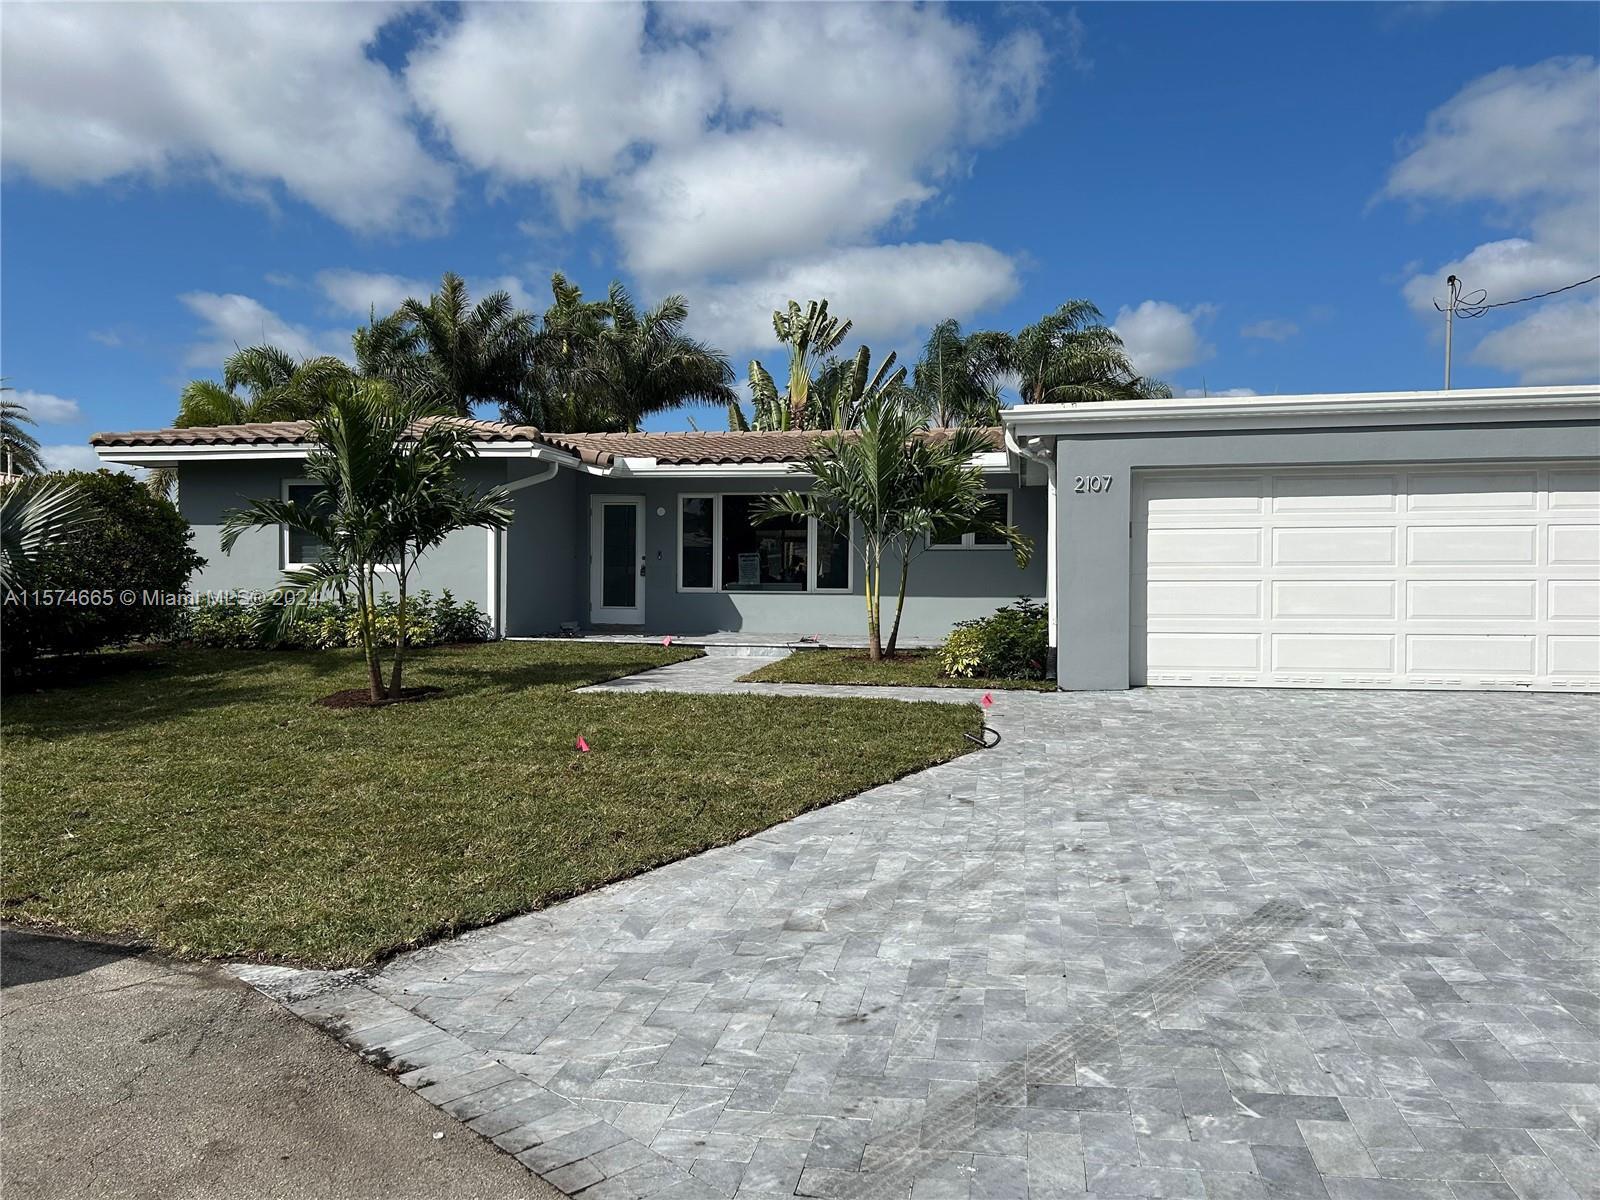 Welcome to your dream pool home on a cul-de-sac in Wilton Manors! This stunning property boasts 3 be